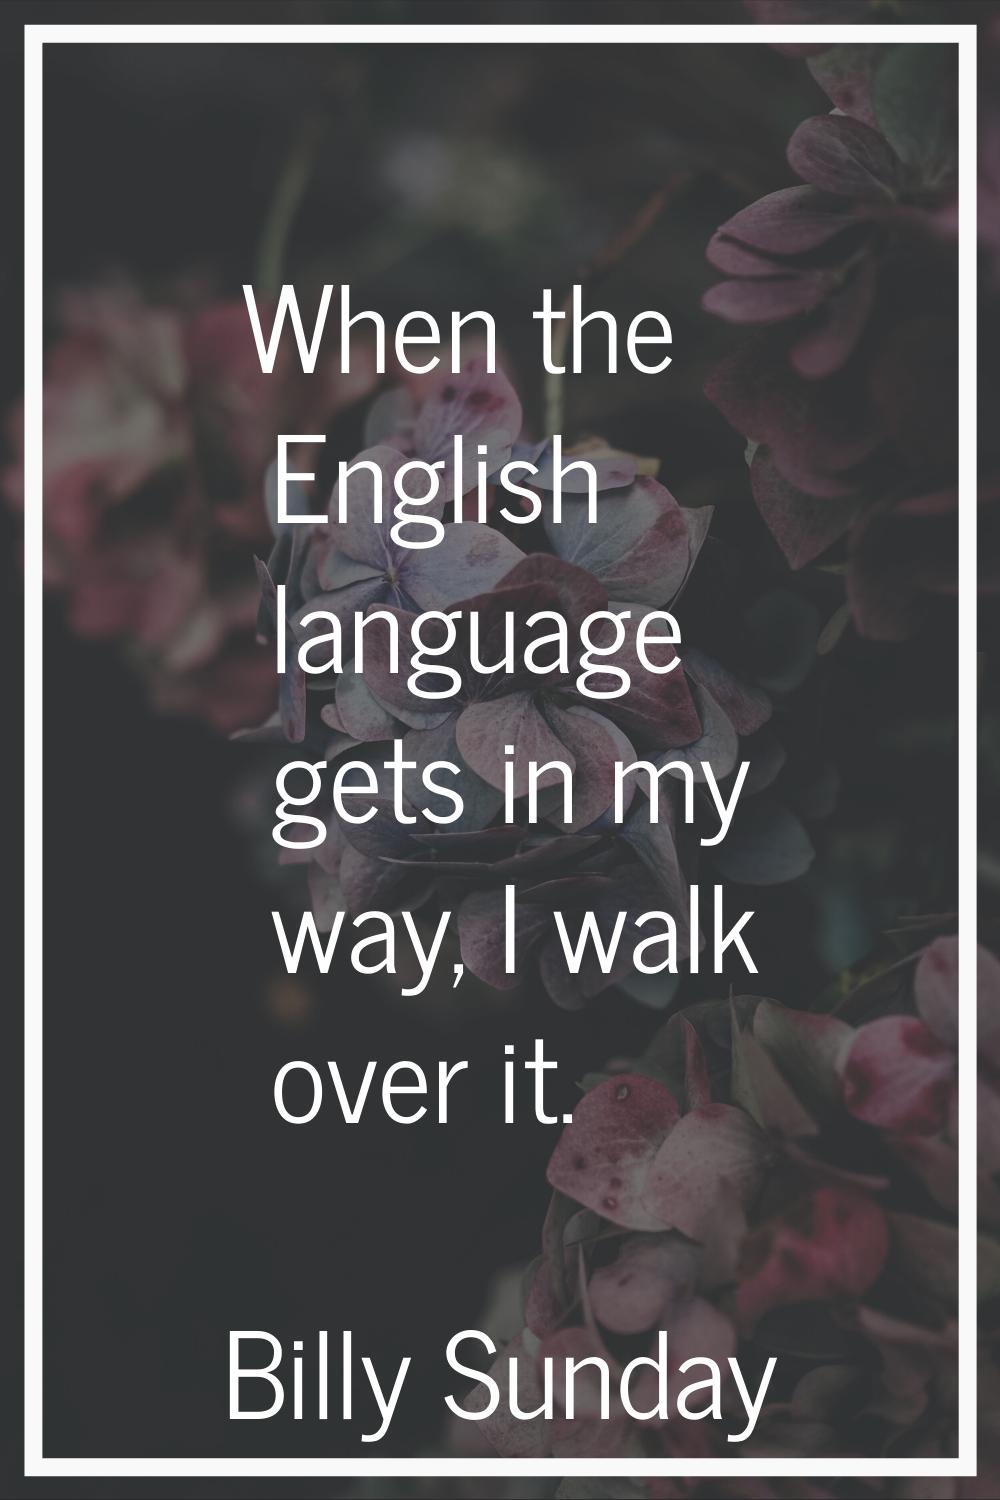 When the English language gets in my way, I walk over it.